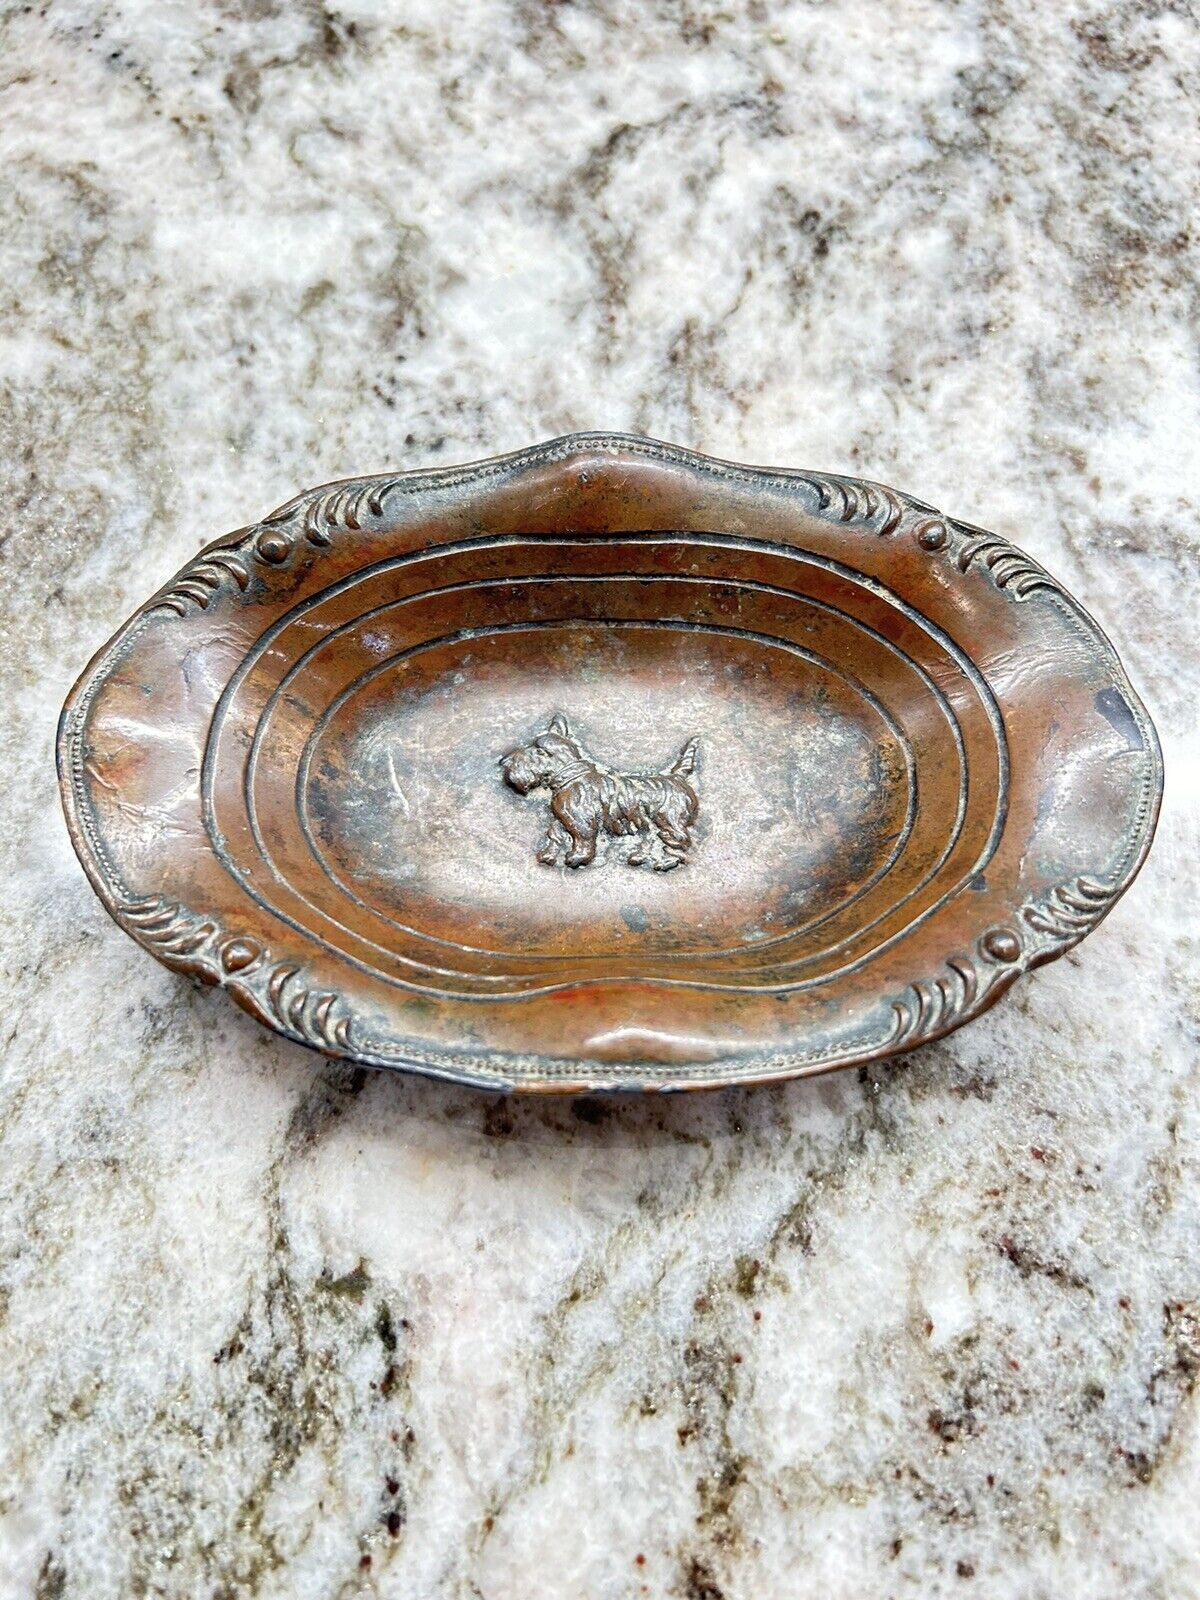 RARE Vintage Copper Soap Dish with Terrier Dog Or Antique Jewelry Coin tray